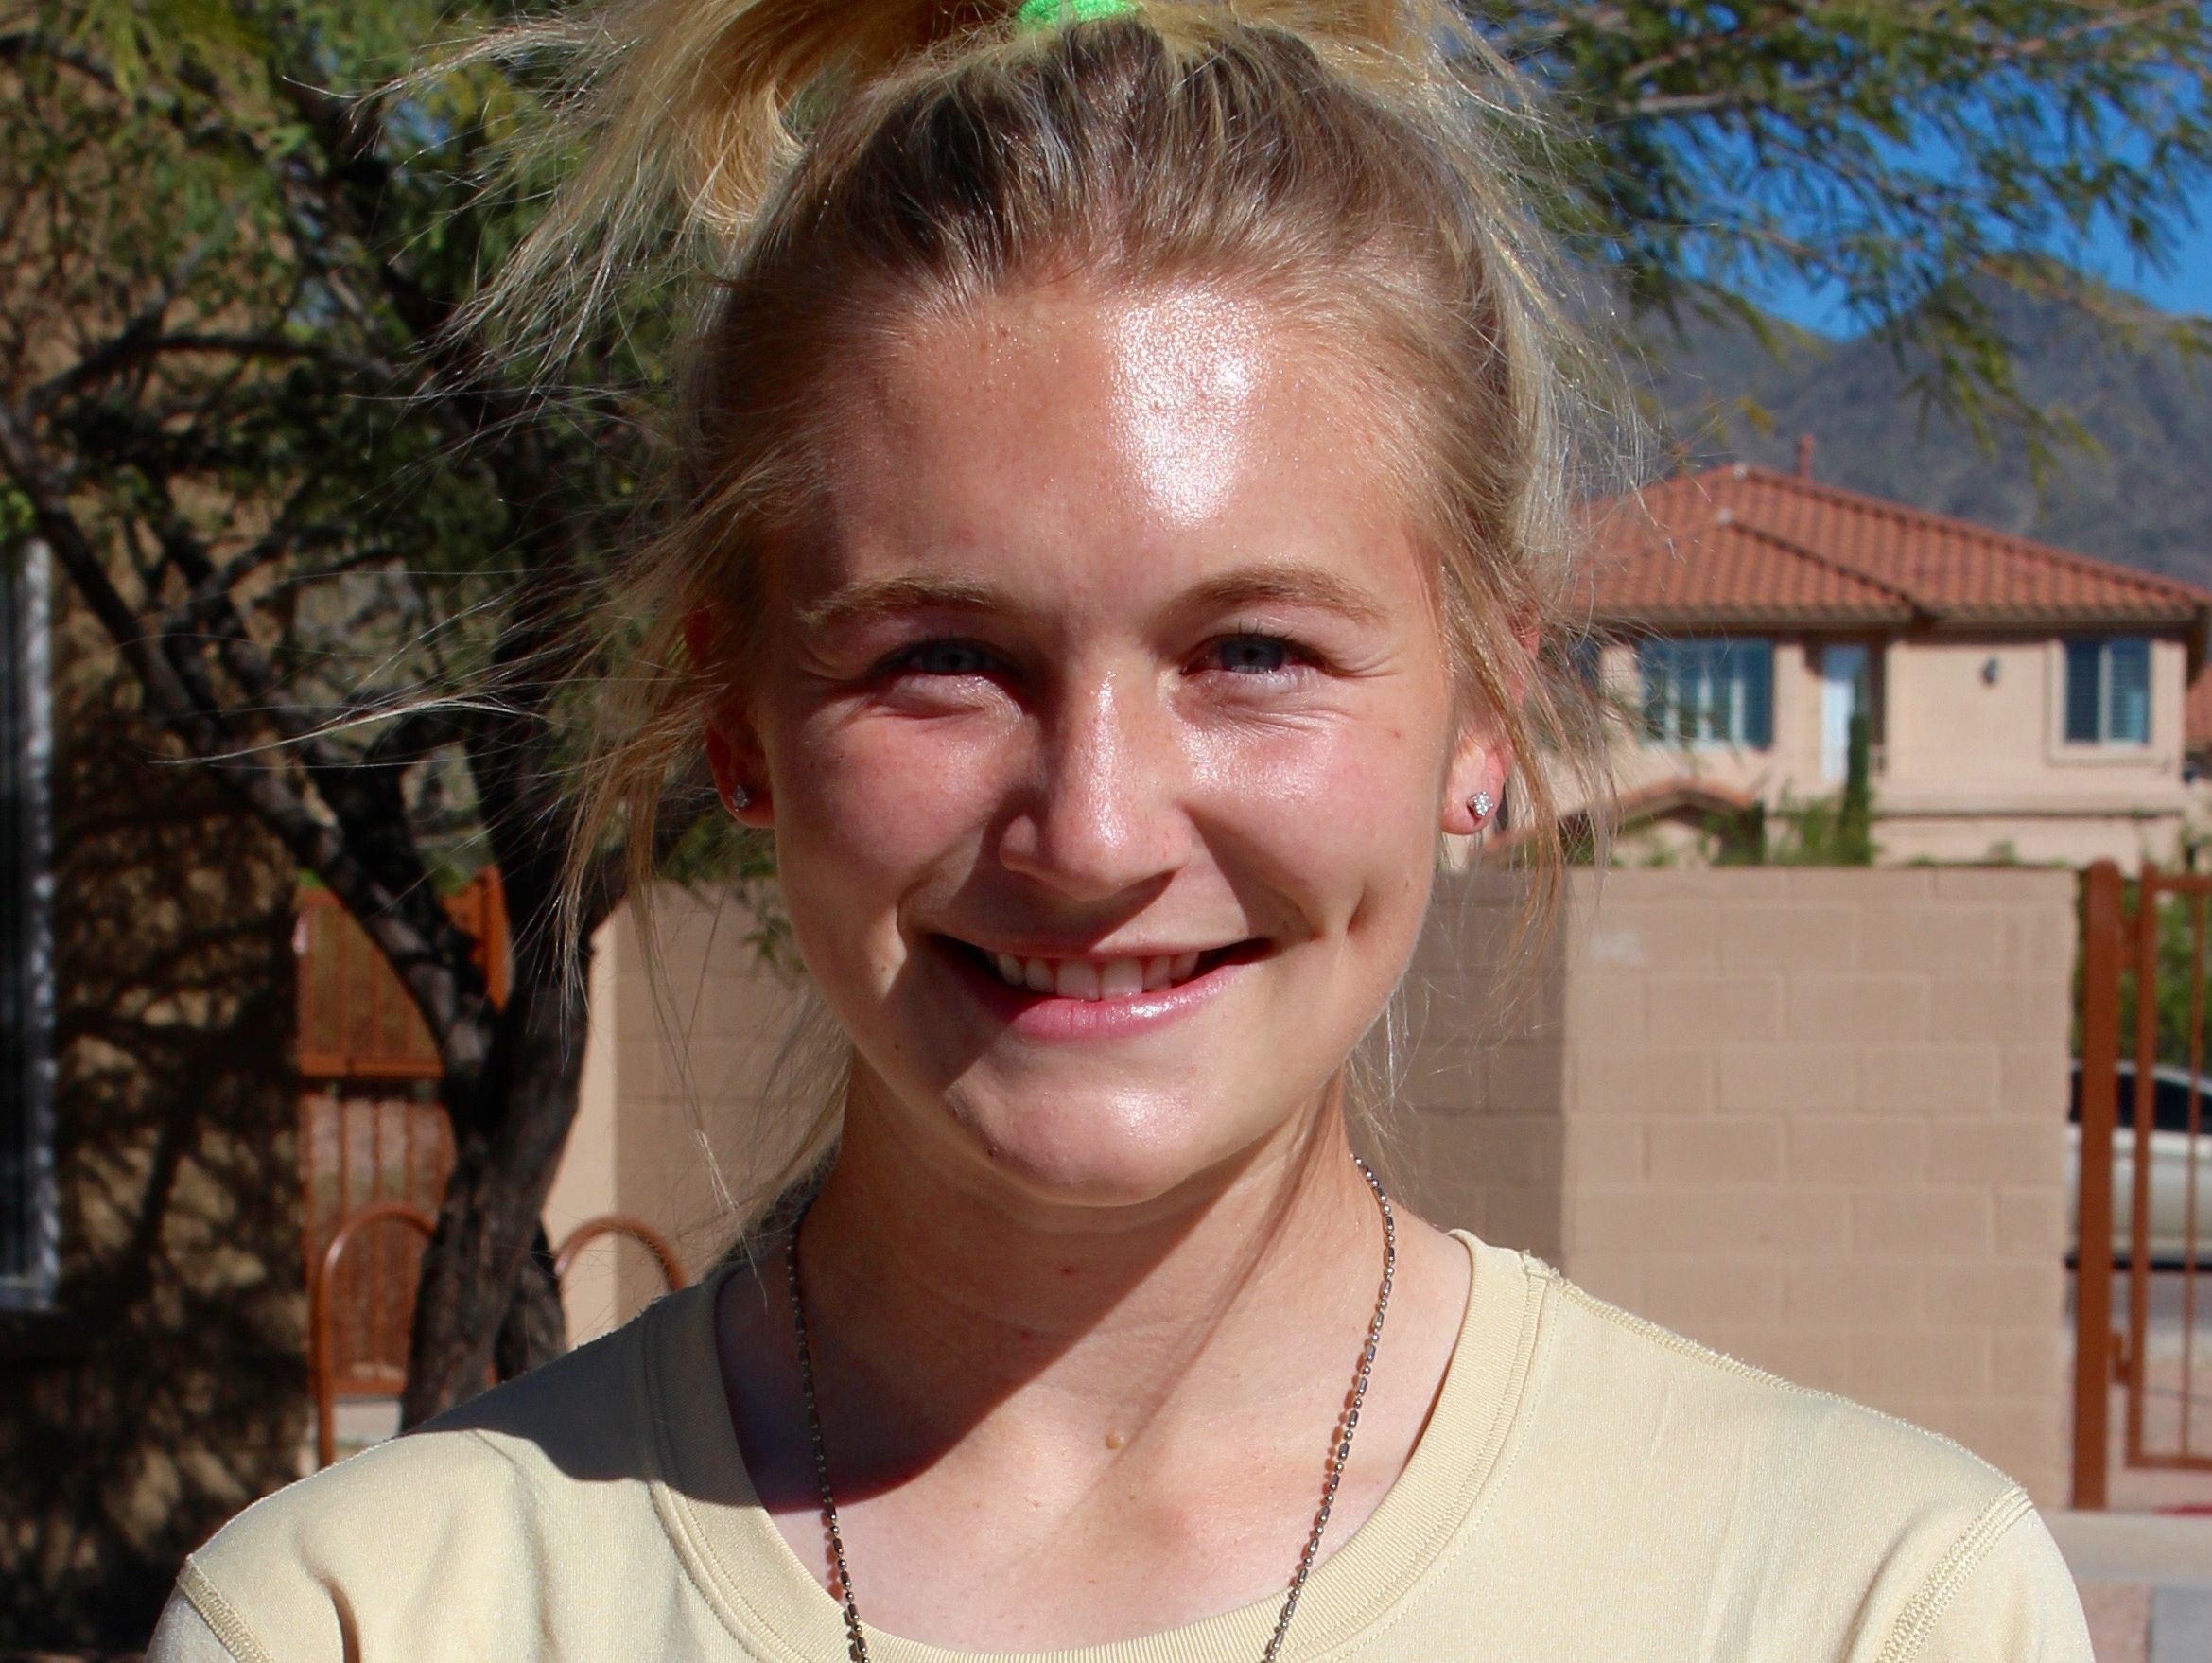 Taylor Culver, from Scottsdale Notre Dame Prep, is the Arizona Sports Awards Female Athlete of the Week, presented by La-Z-Boy Furniture Galleries, for Feb. 18-25.